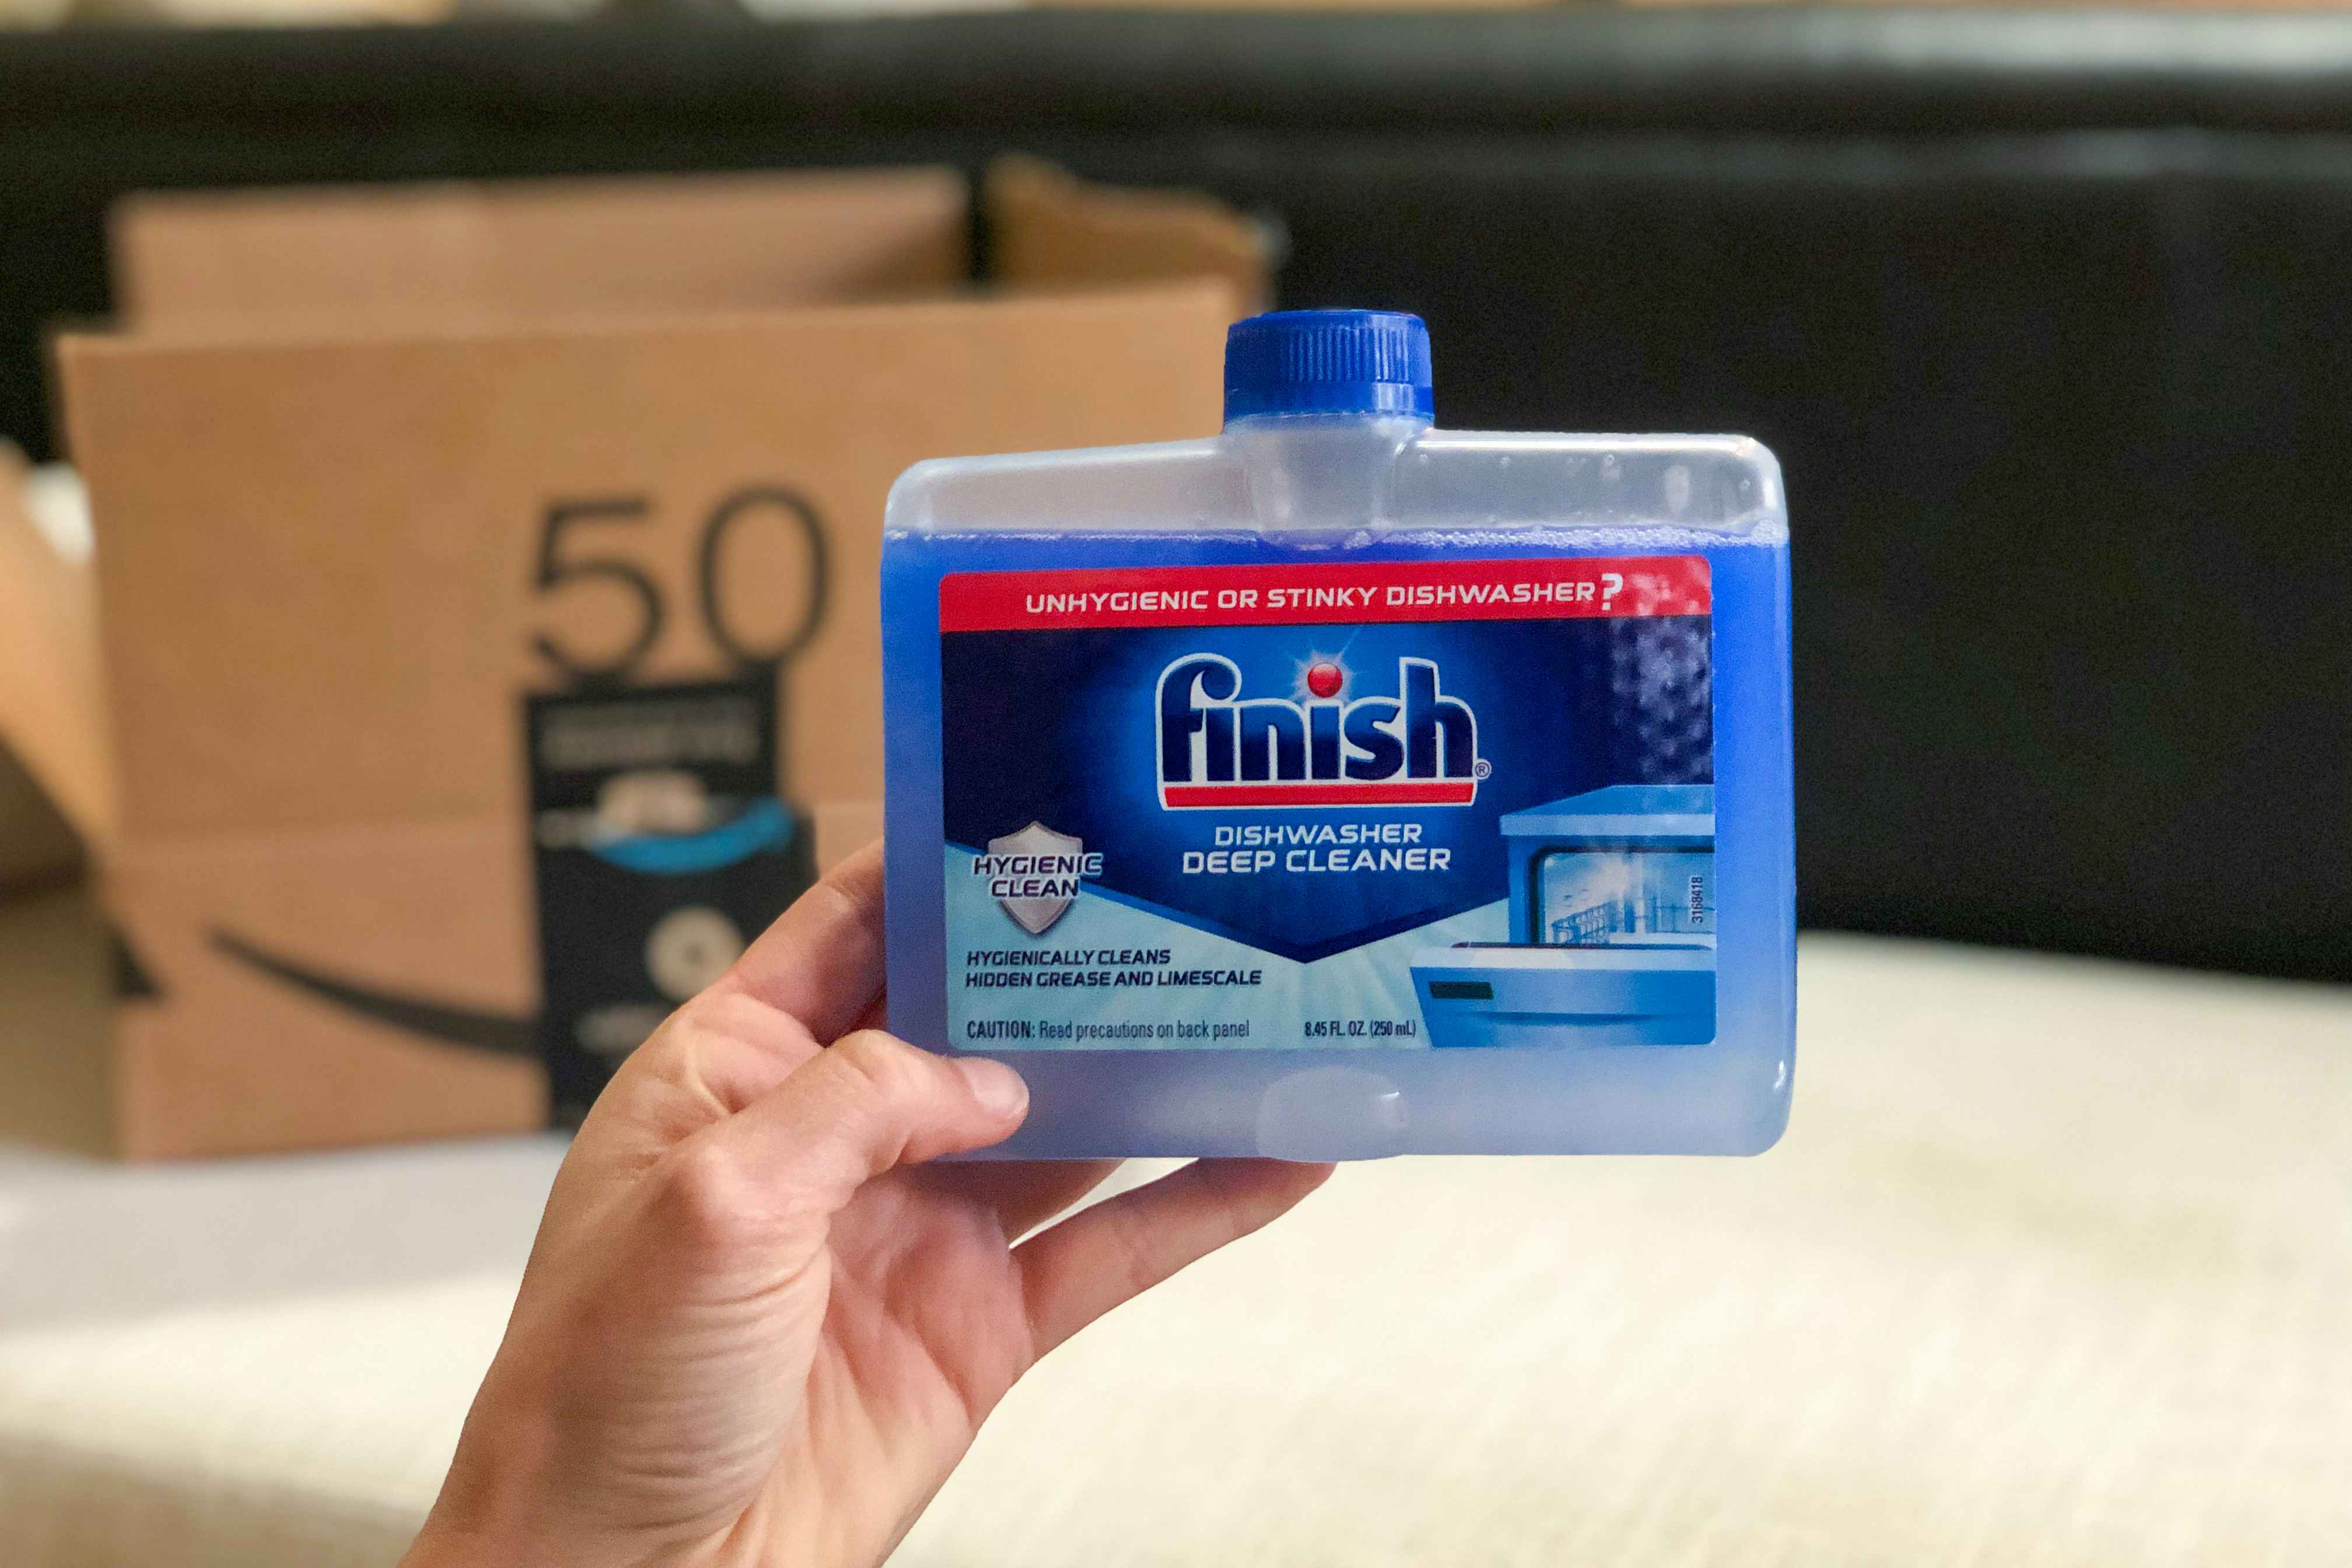 Get a Finish Dishwasher Cleaner for as Low as $1.24 on Amazon